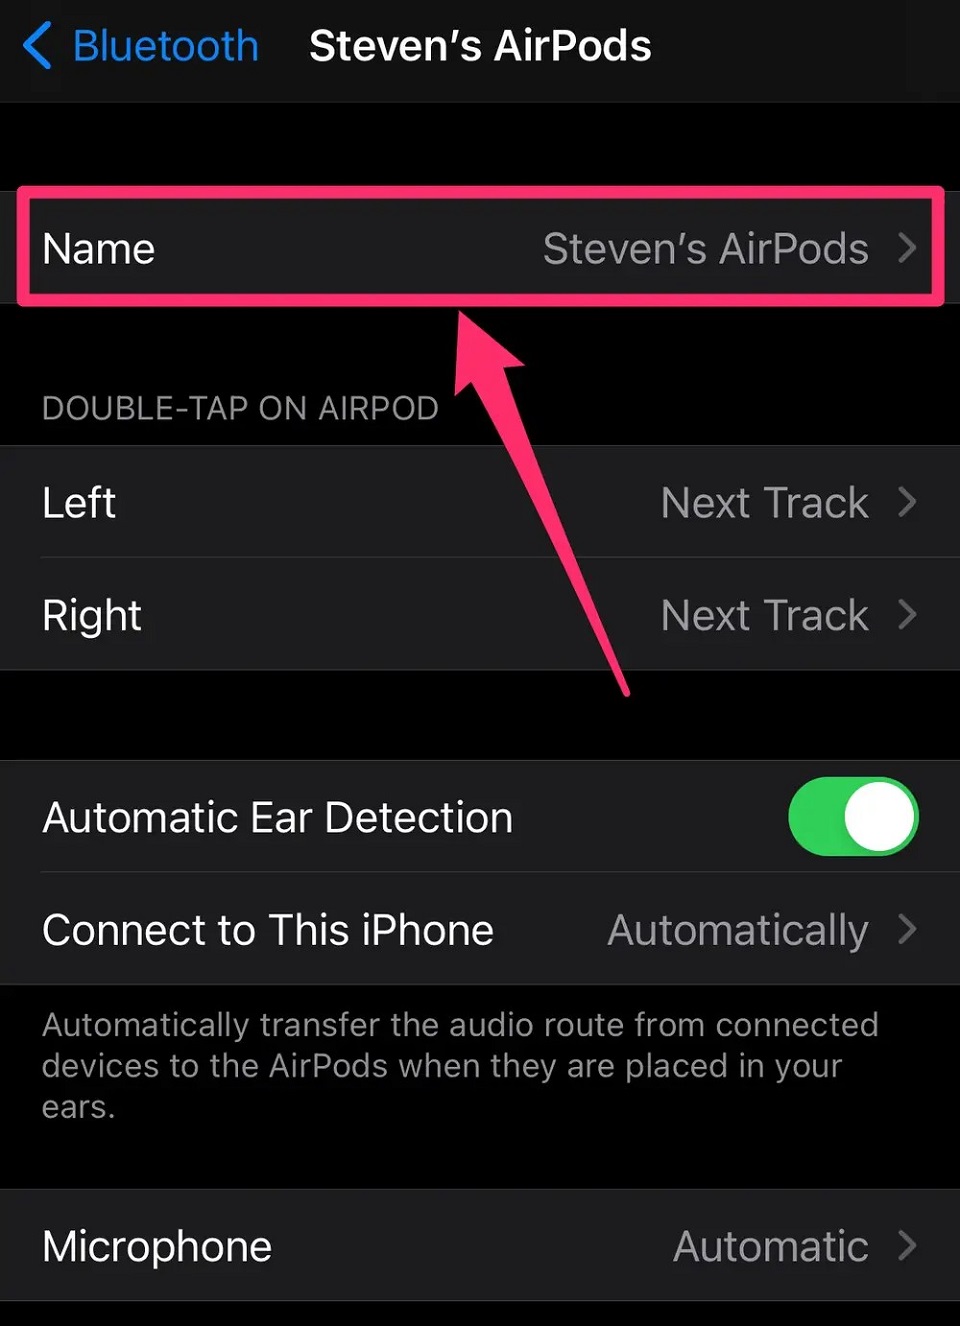 Change the name of your AirPods